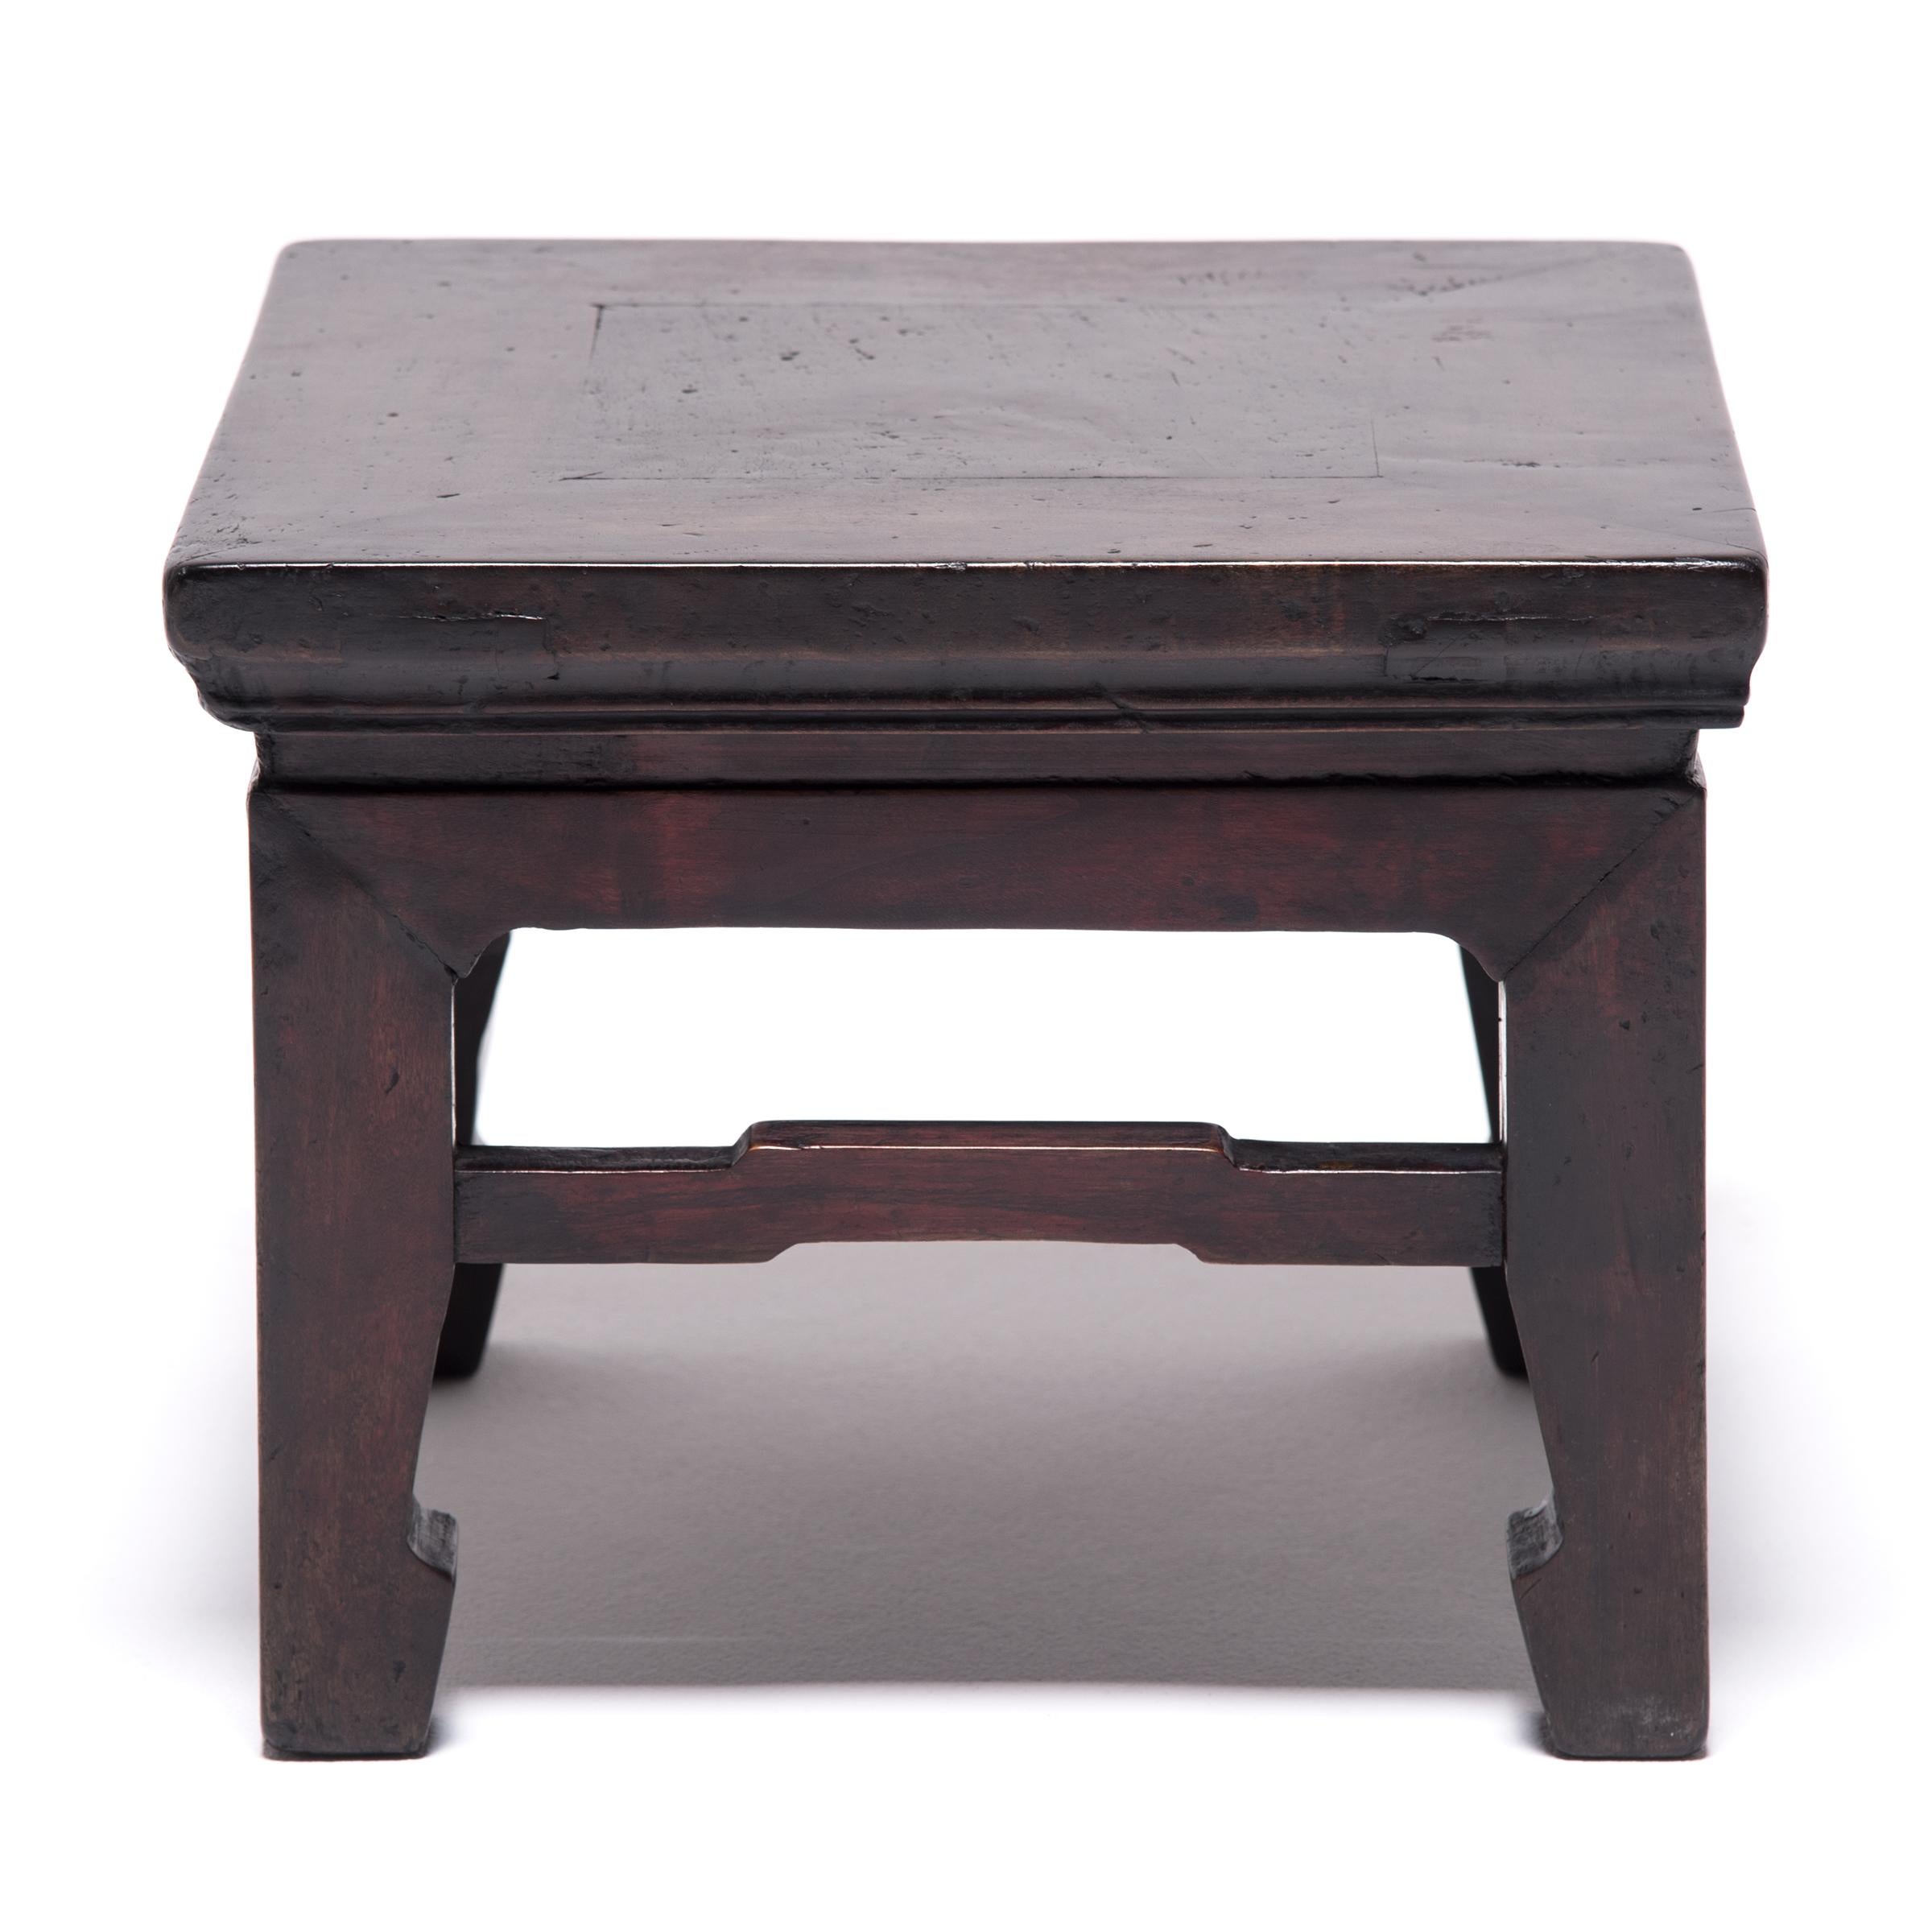 Raised seating first appeared in China in the form of portable stools used by commanders on the battlefield. The use of stools rapidly spread to the home, used by all classes and sections of society. Diminutive versions of traditional Qing-dynasty